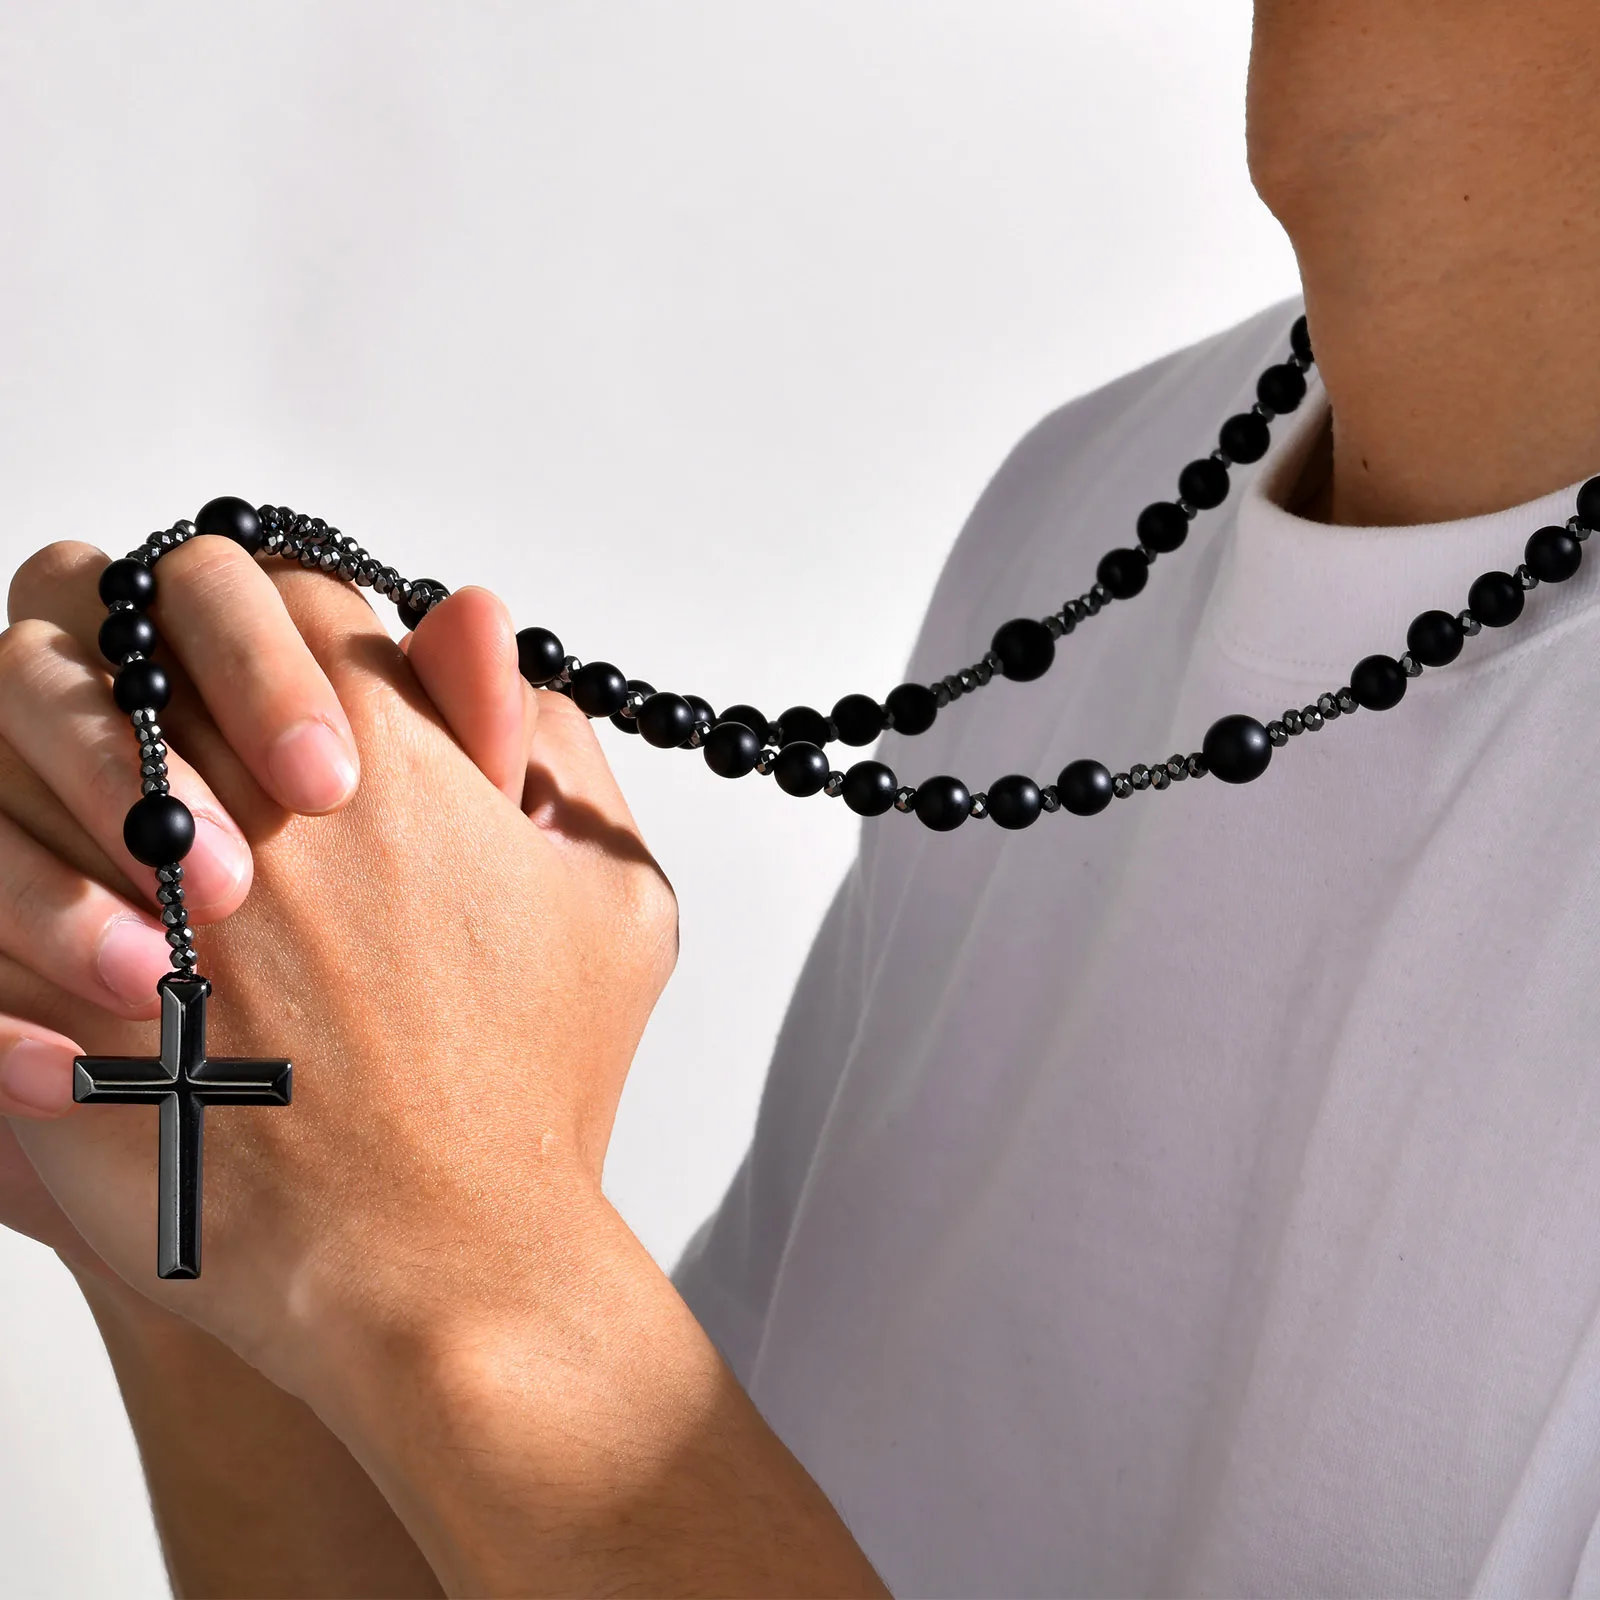 Black Beads Cross Rosary Necklaces for Men, Male Power Balance Hematite  Chain Necklace, Religious Faith Prayer Jewelry - AliExpress